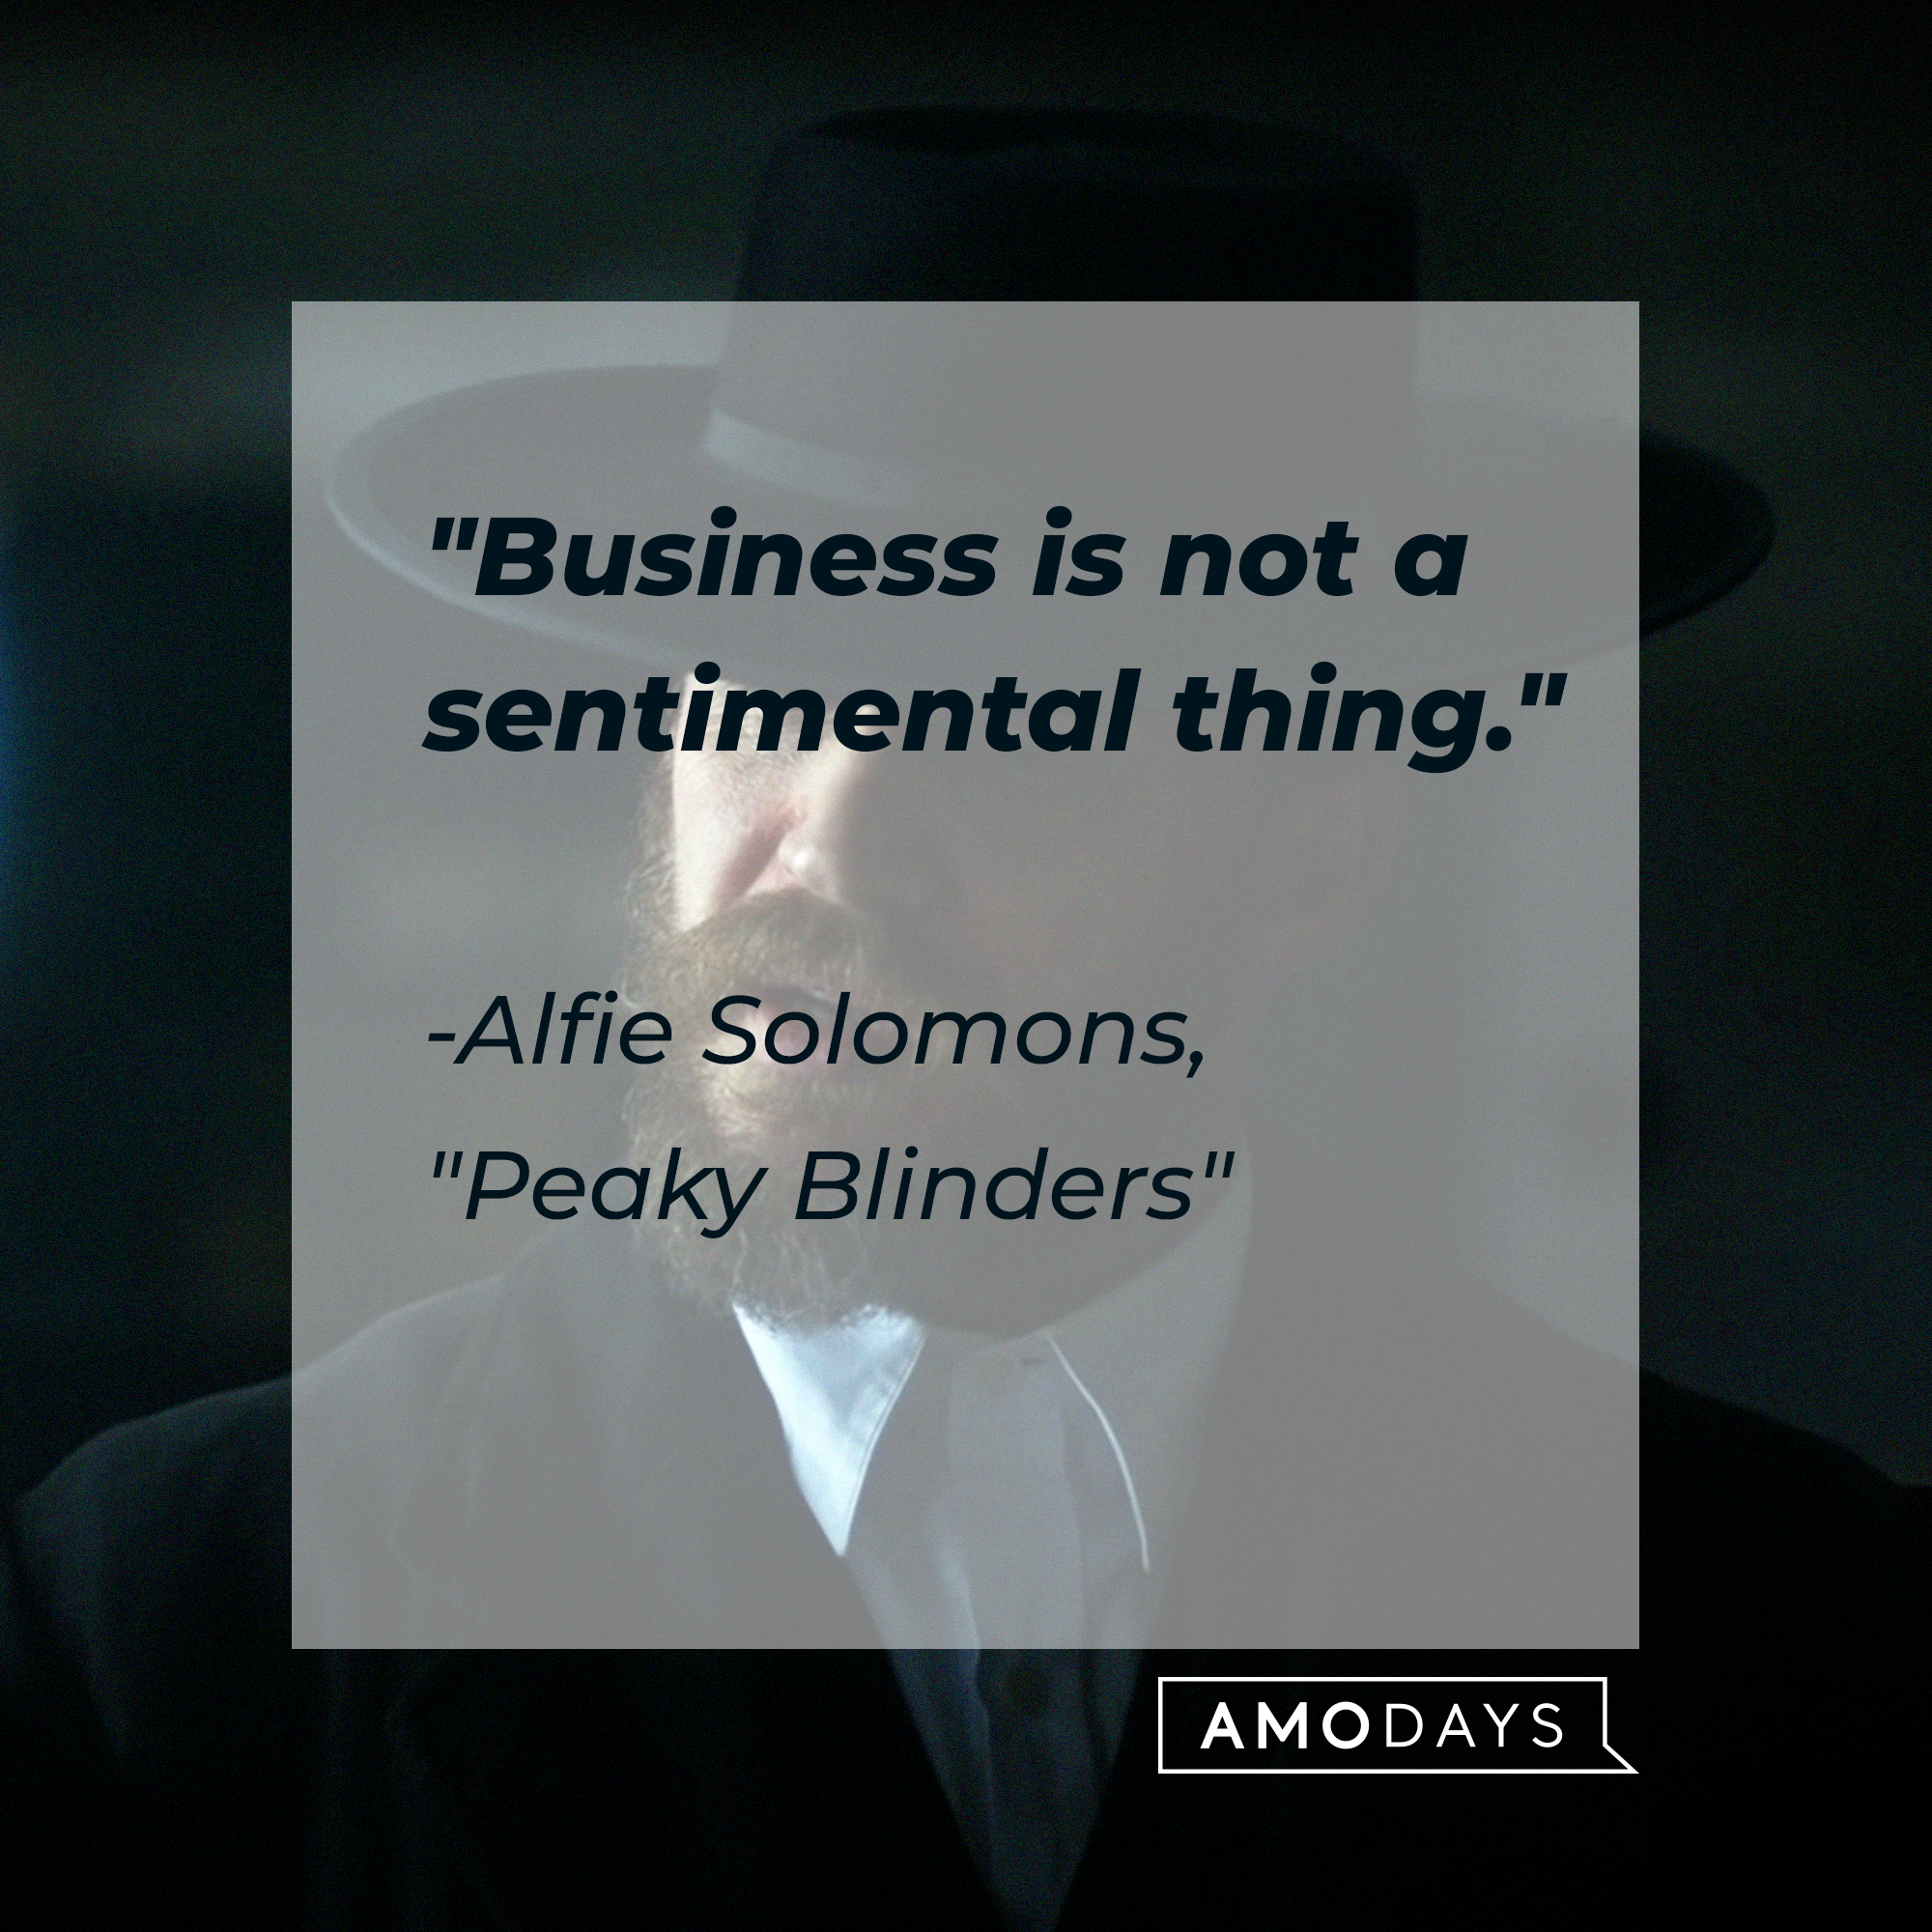 Alfie Solomons’s quote: “Business is not a sentimental thing.” | Source: facebook.com/PeakyBlinders